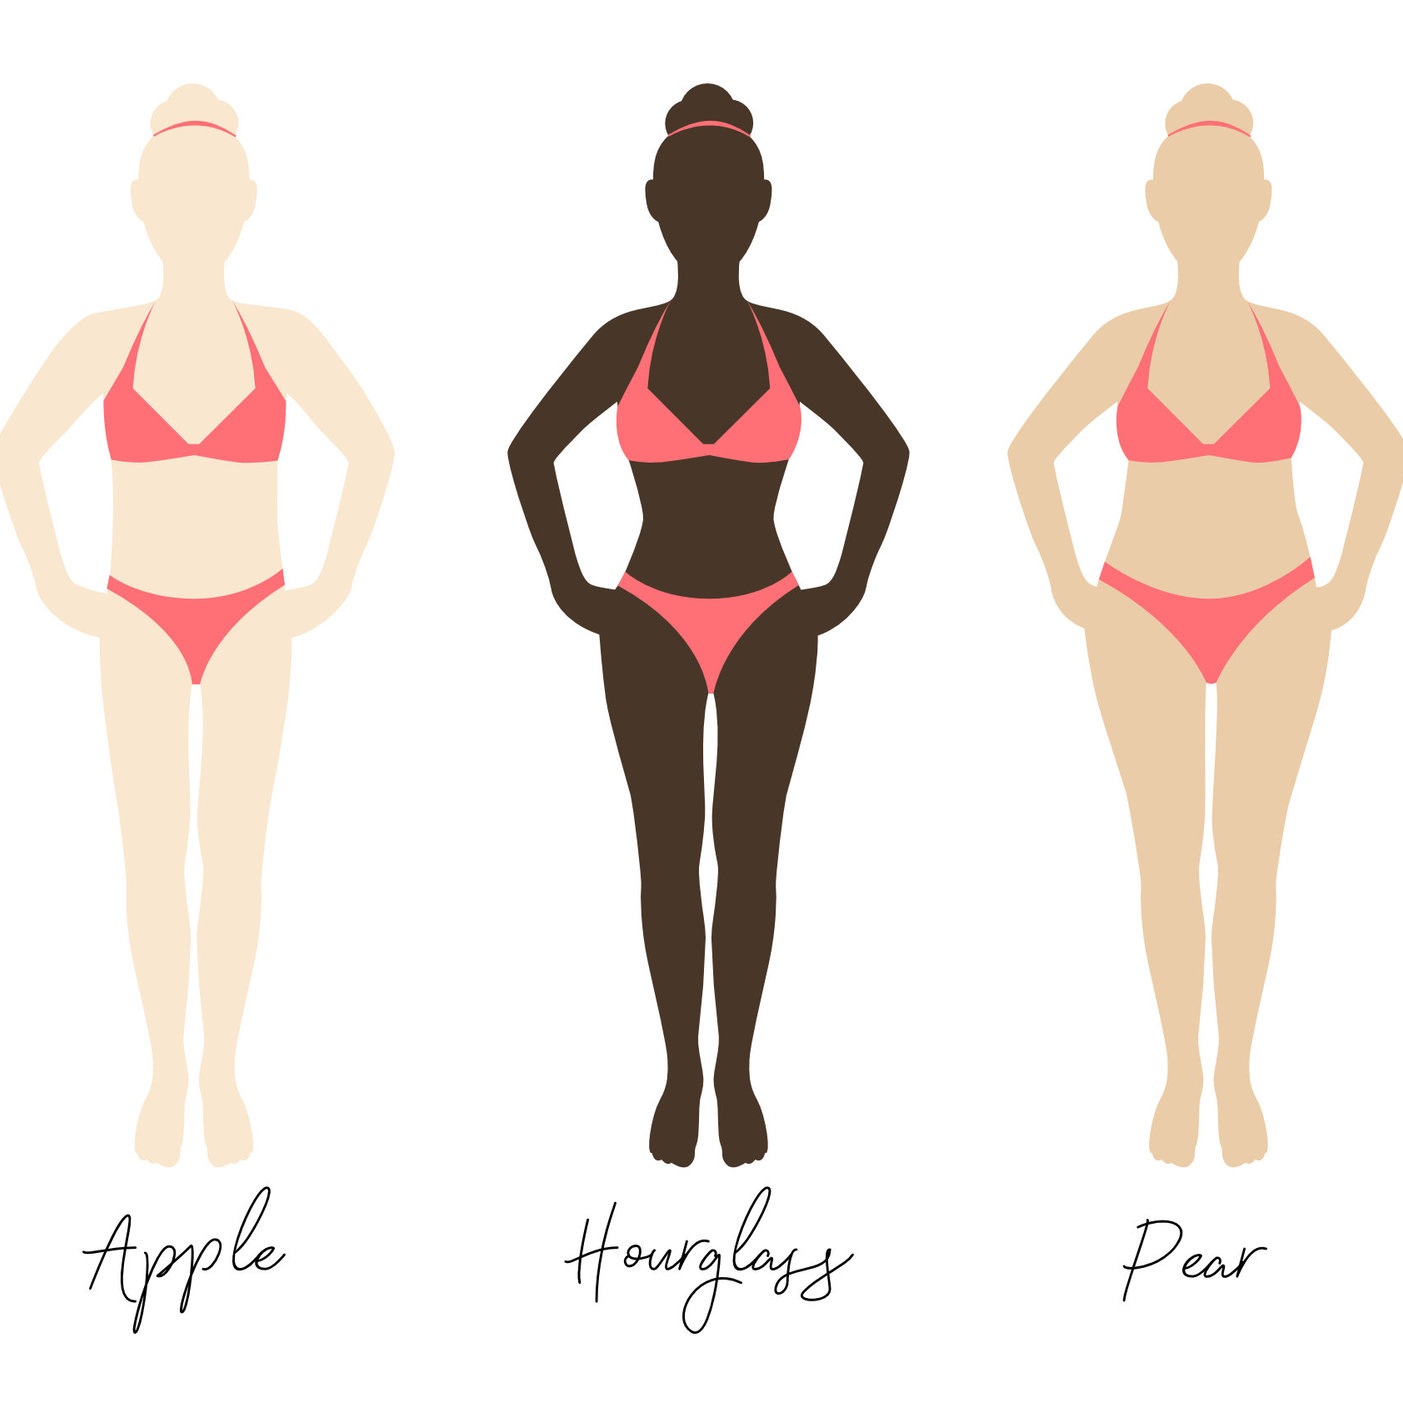 How I can know which body shape I have,I have 9 inches difference between  waist to hip or bust ratio, either it is hourglass or rectangular, I use  calculators but some says